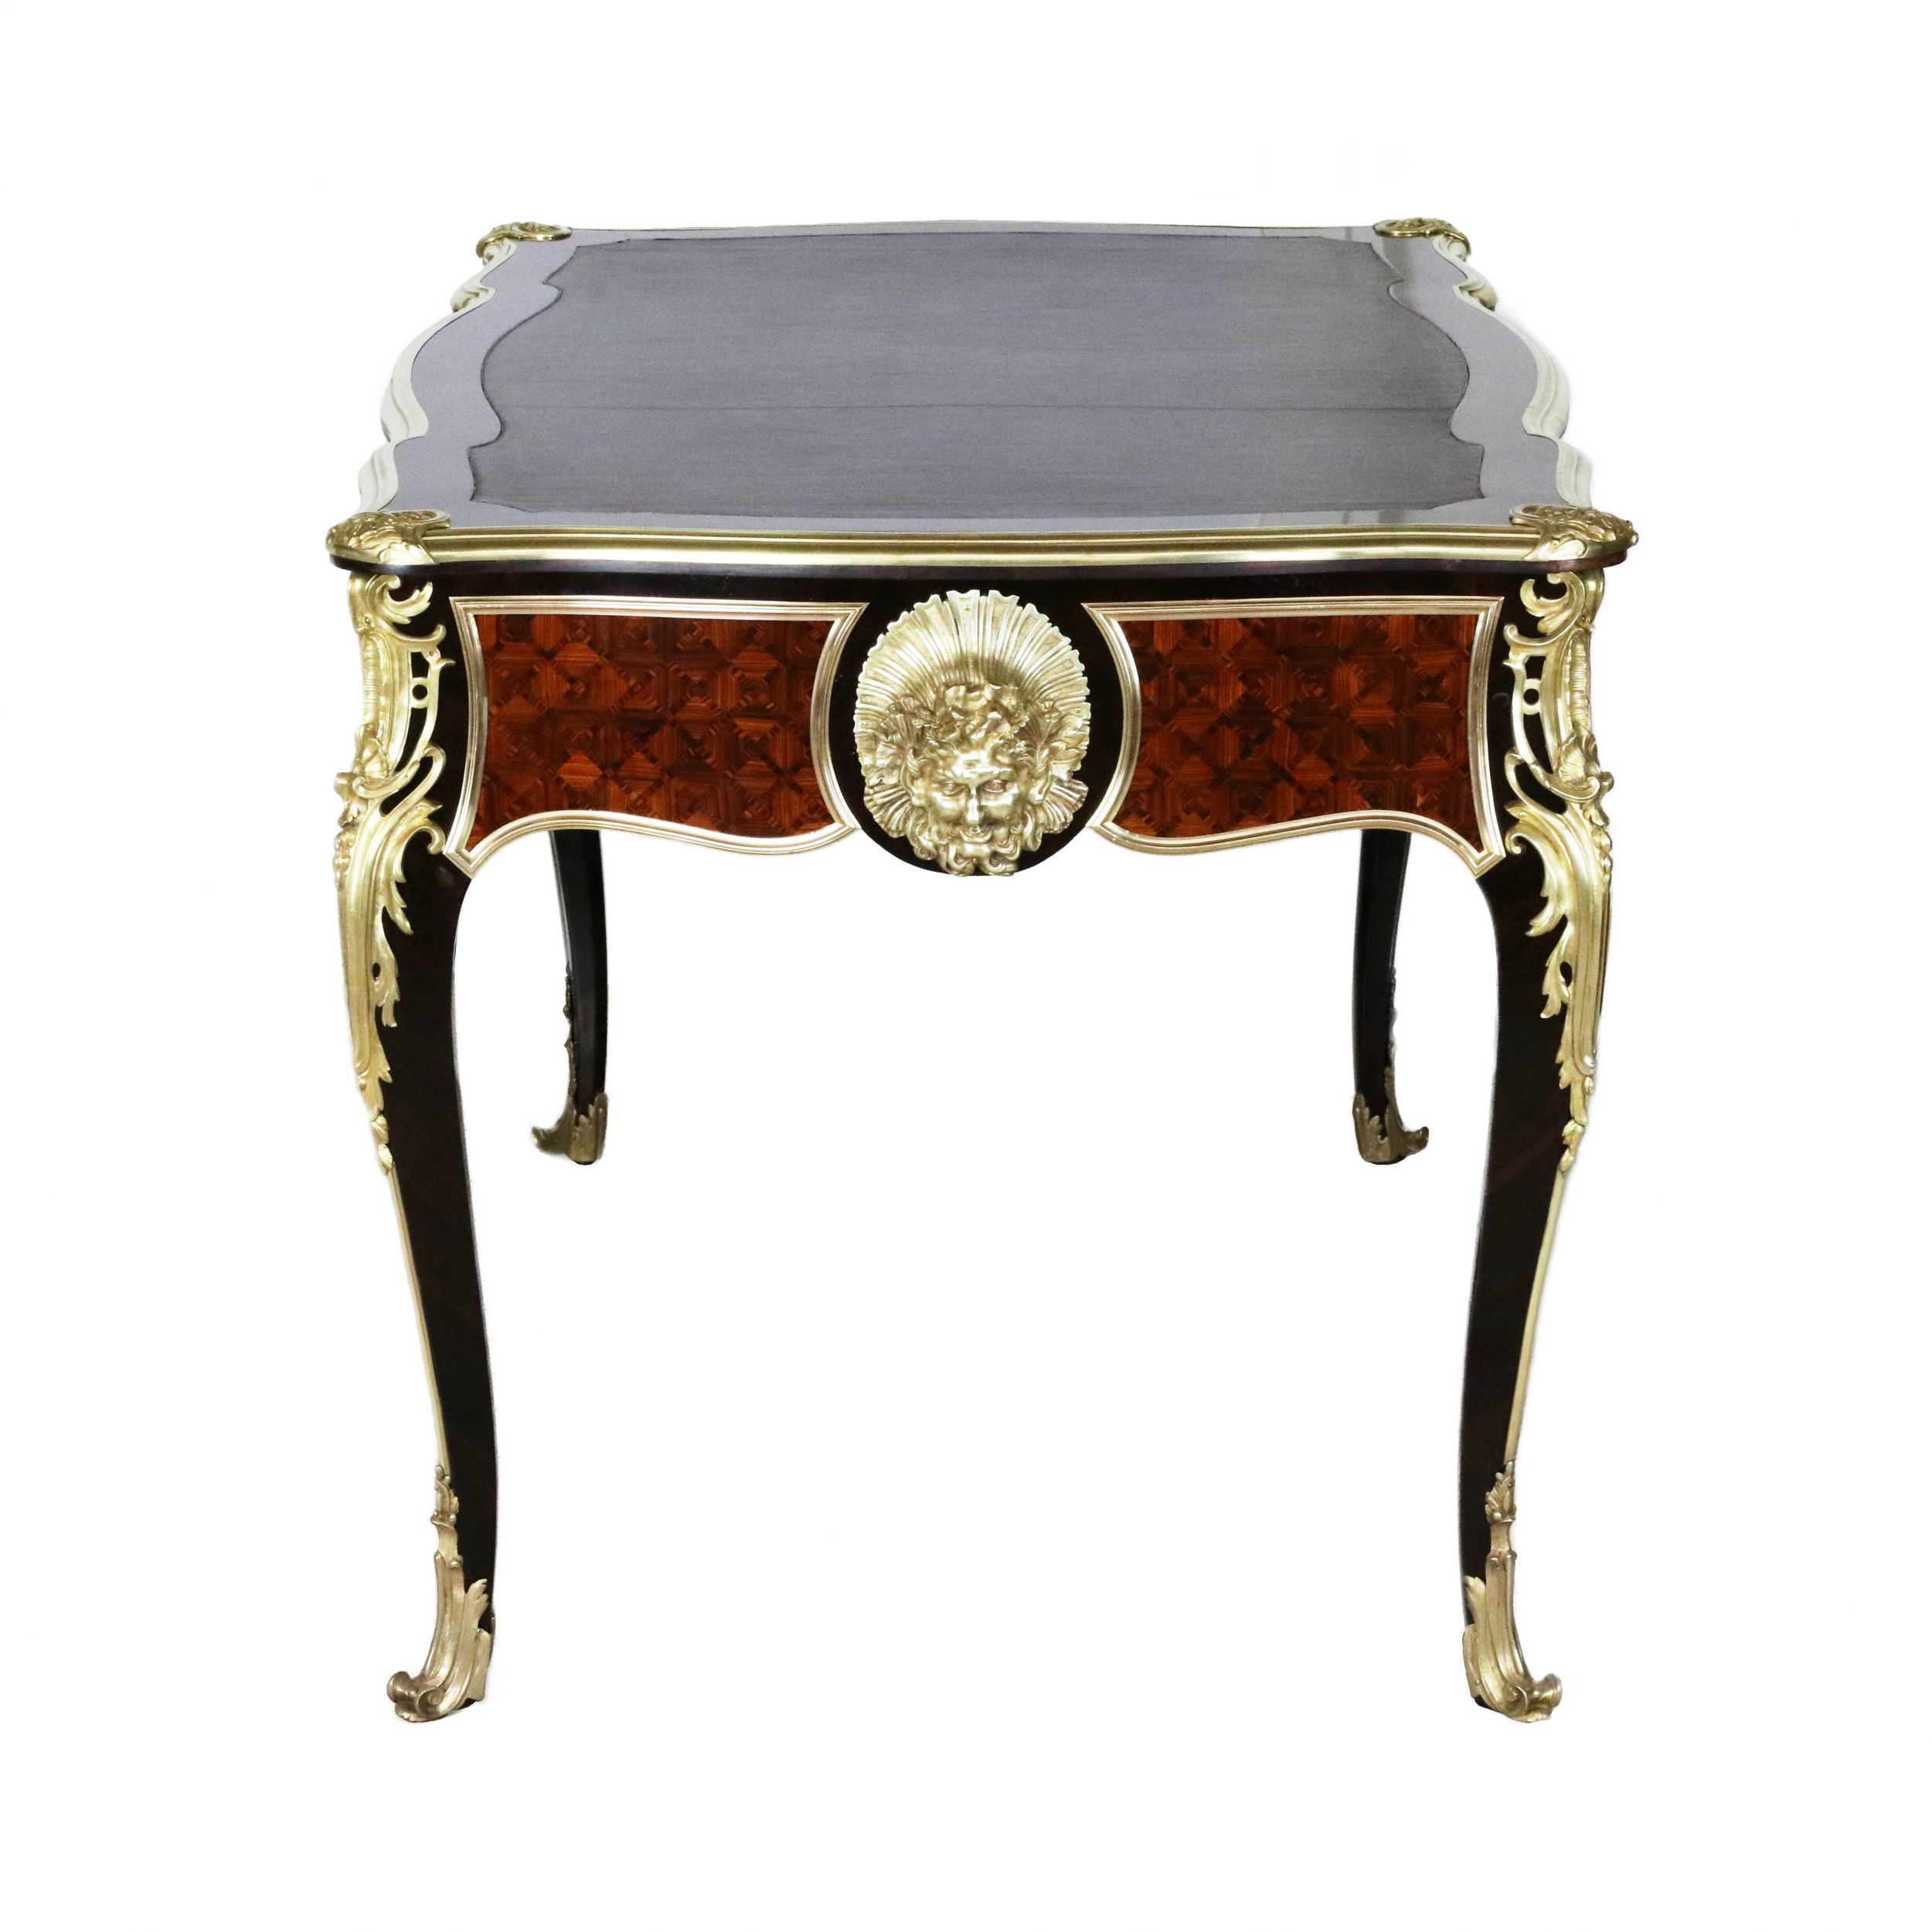 Magnificent writing desk in wood and gilded bronze, Louis XV style. - Image 6 of 8